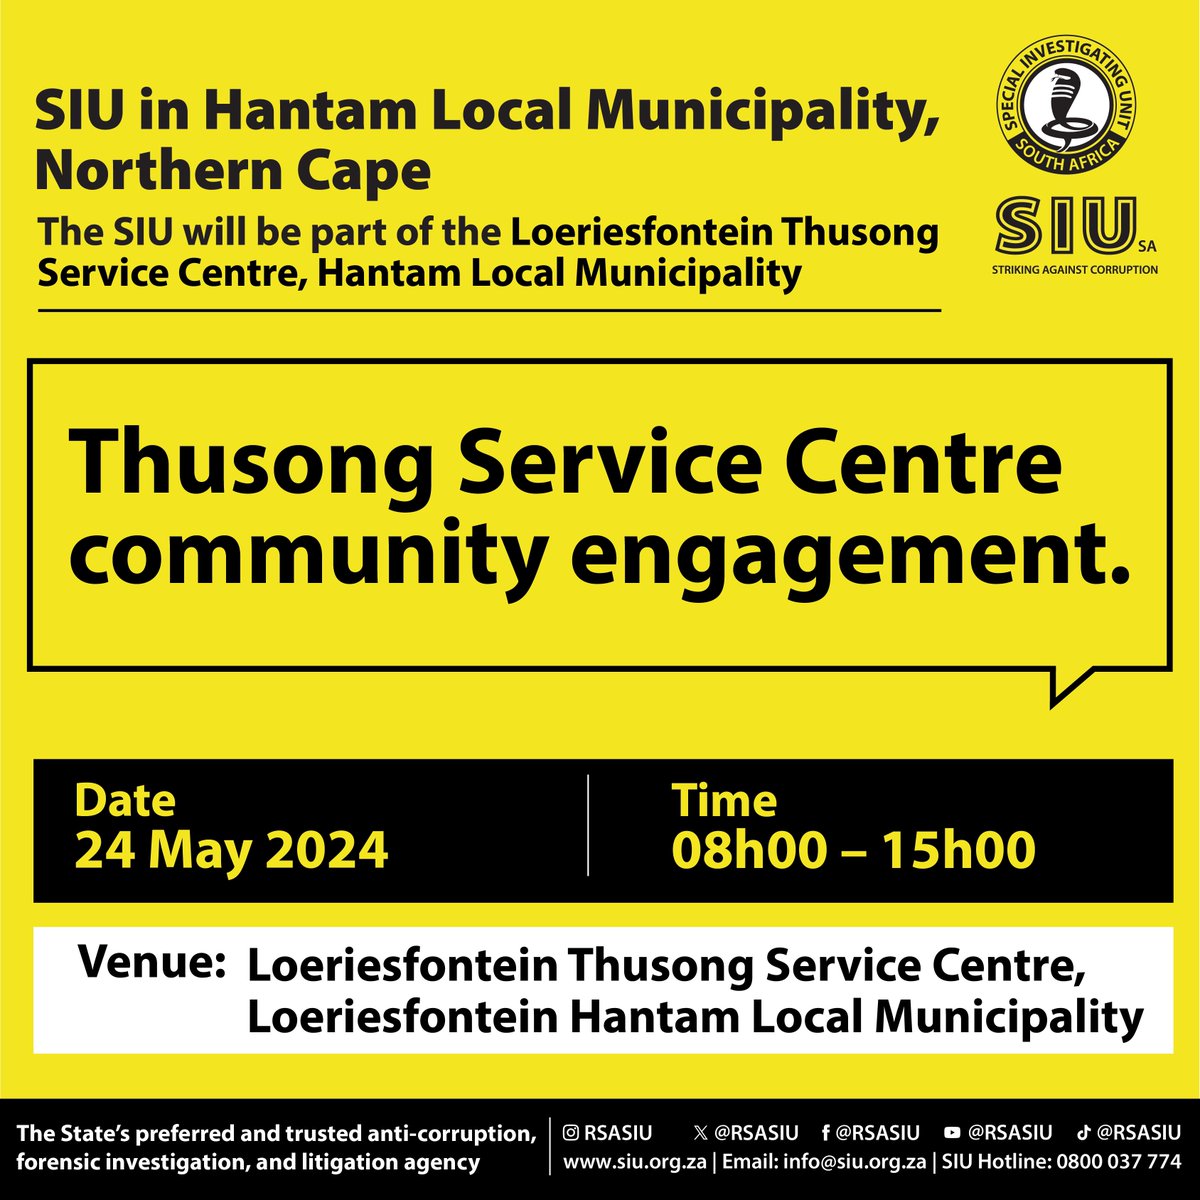 Today, the SIU is in the Northern Cape today as part of the @GCISMedia’s Thusong Service Centre. Details below: